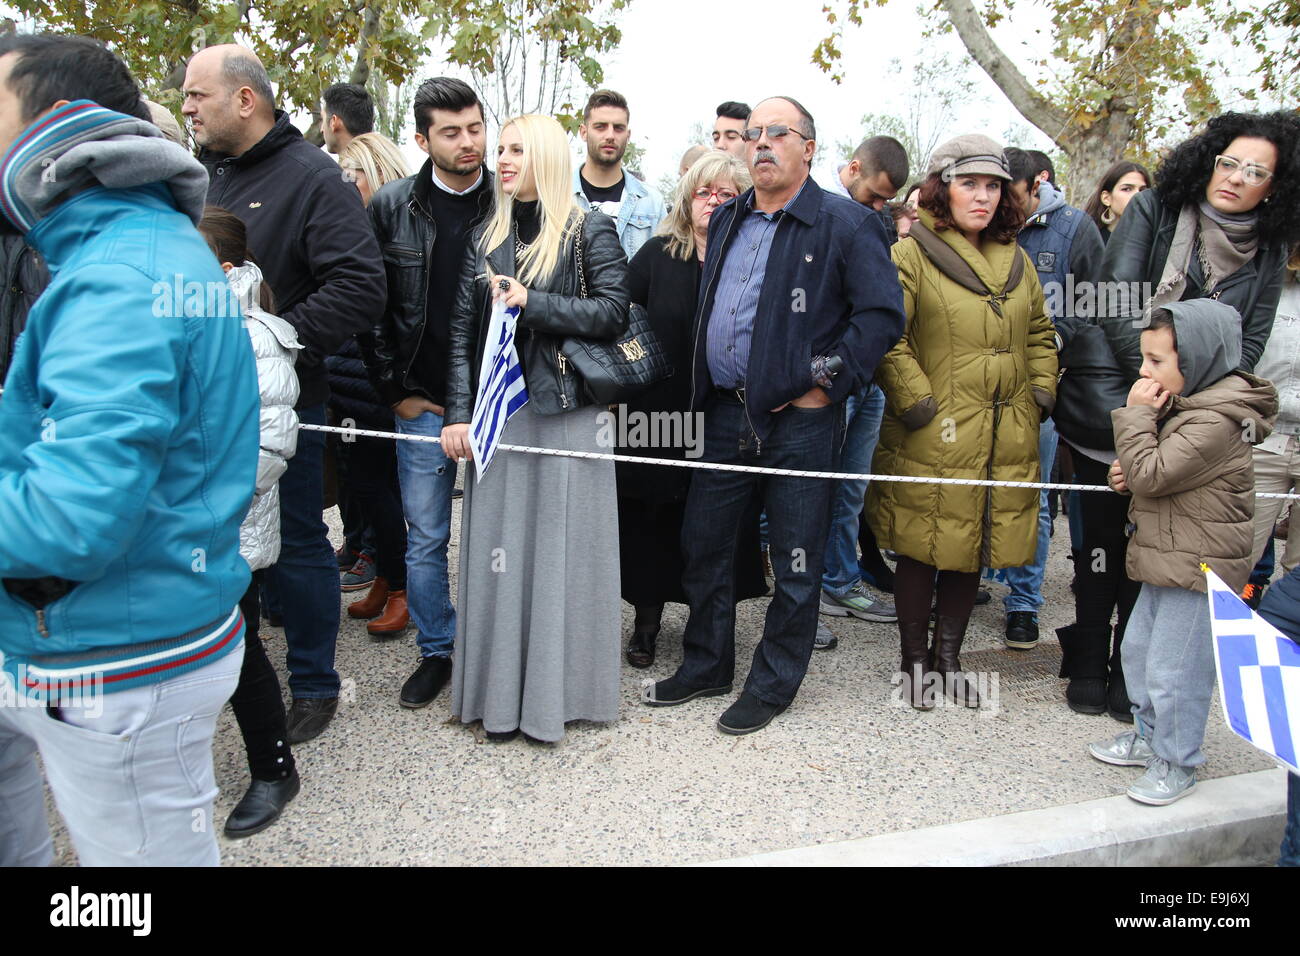 Thessaloniki, Greece, 28th October, 2014. Greece marked the national holiday of the "OHI Day" (No Day) with parades held nationwide to commemorate the country's refusal to side with then Nazi Germany and fascist Italy during World War II on Oct. 28, 1940.  Credit:  Orhan Tsolak /Alamy Live News Stock Photo